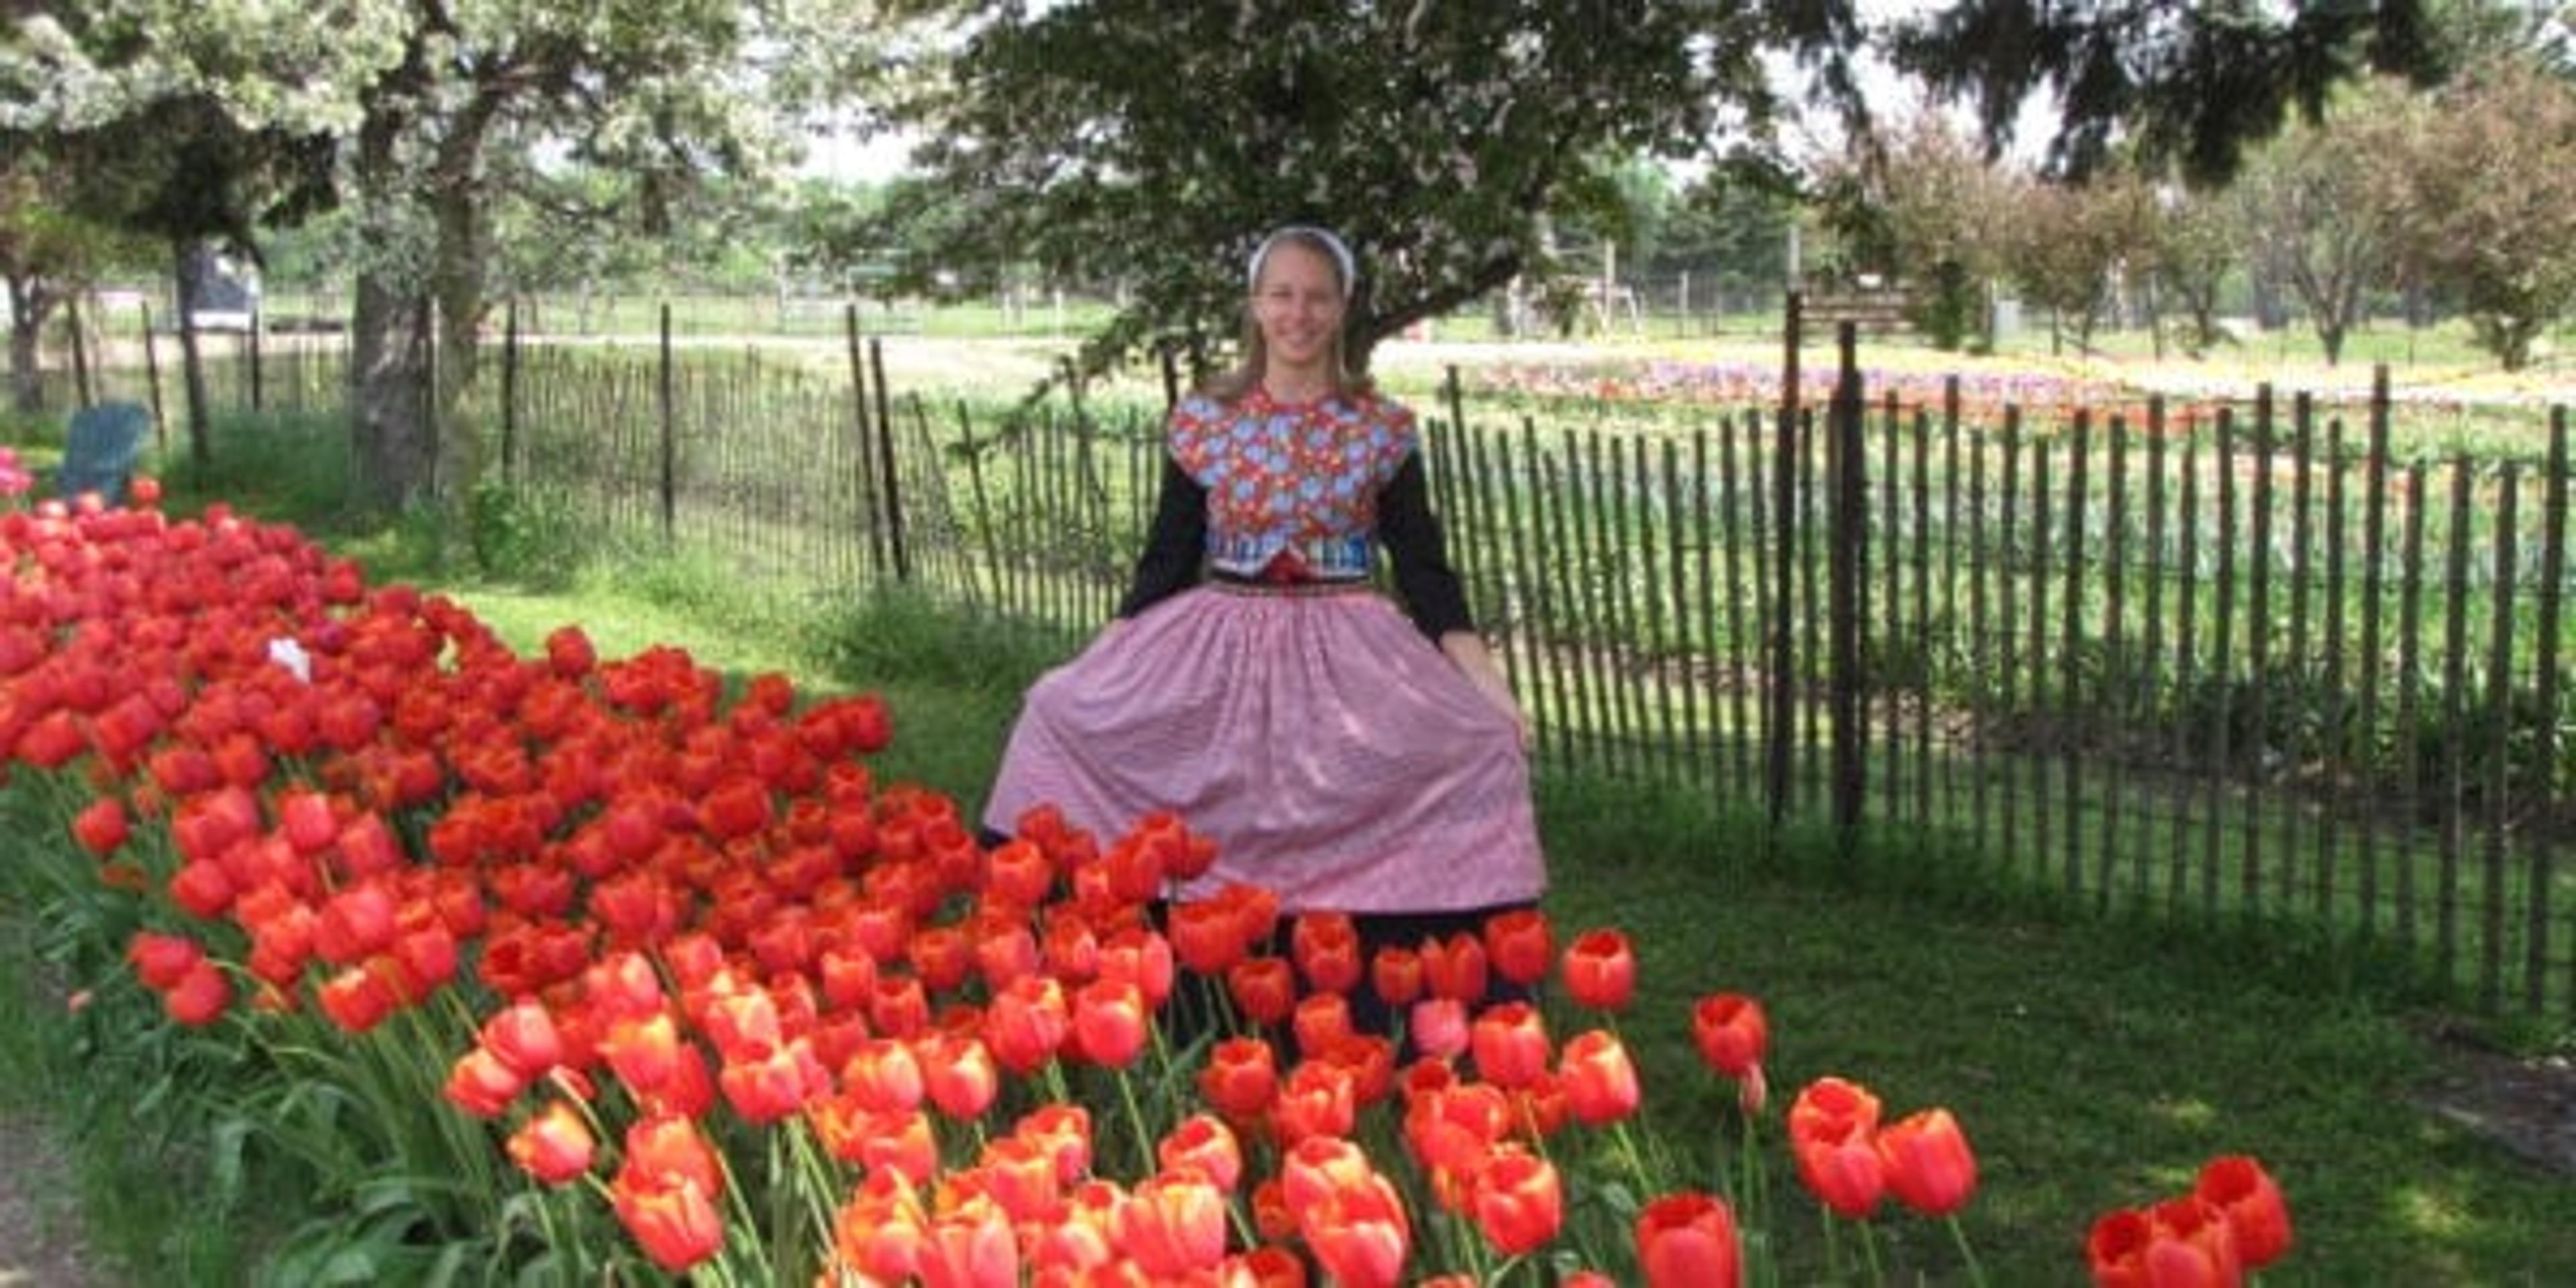 Nicole Prins in front of Tulips in a Dutch outfit